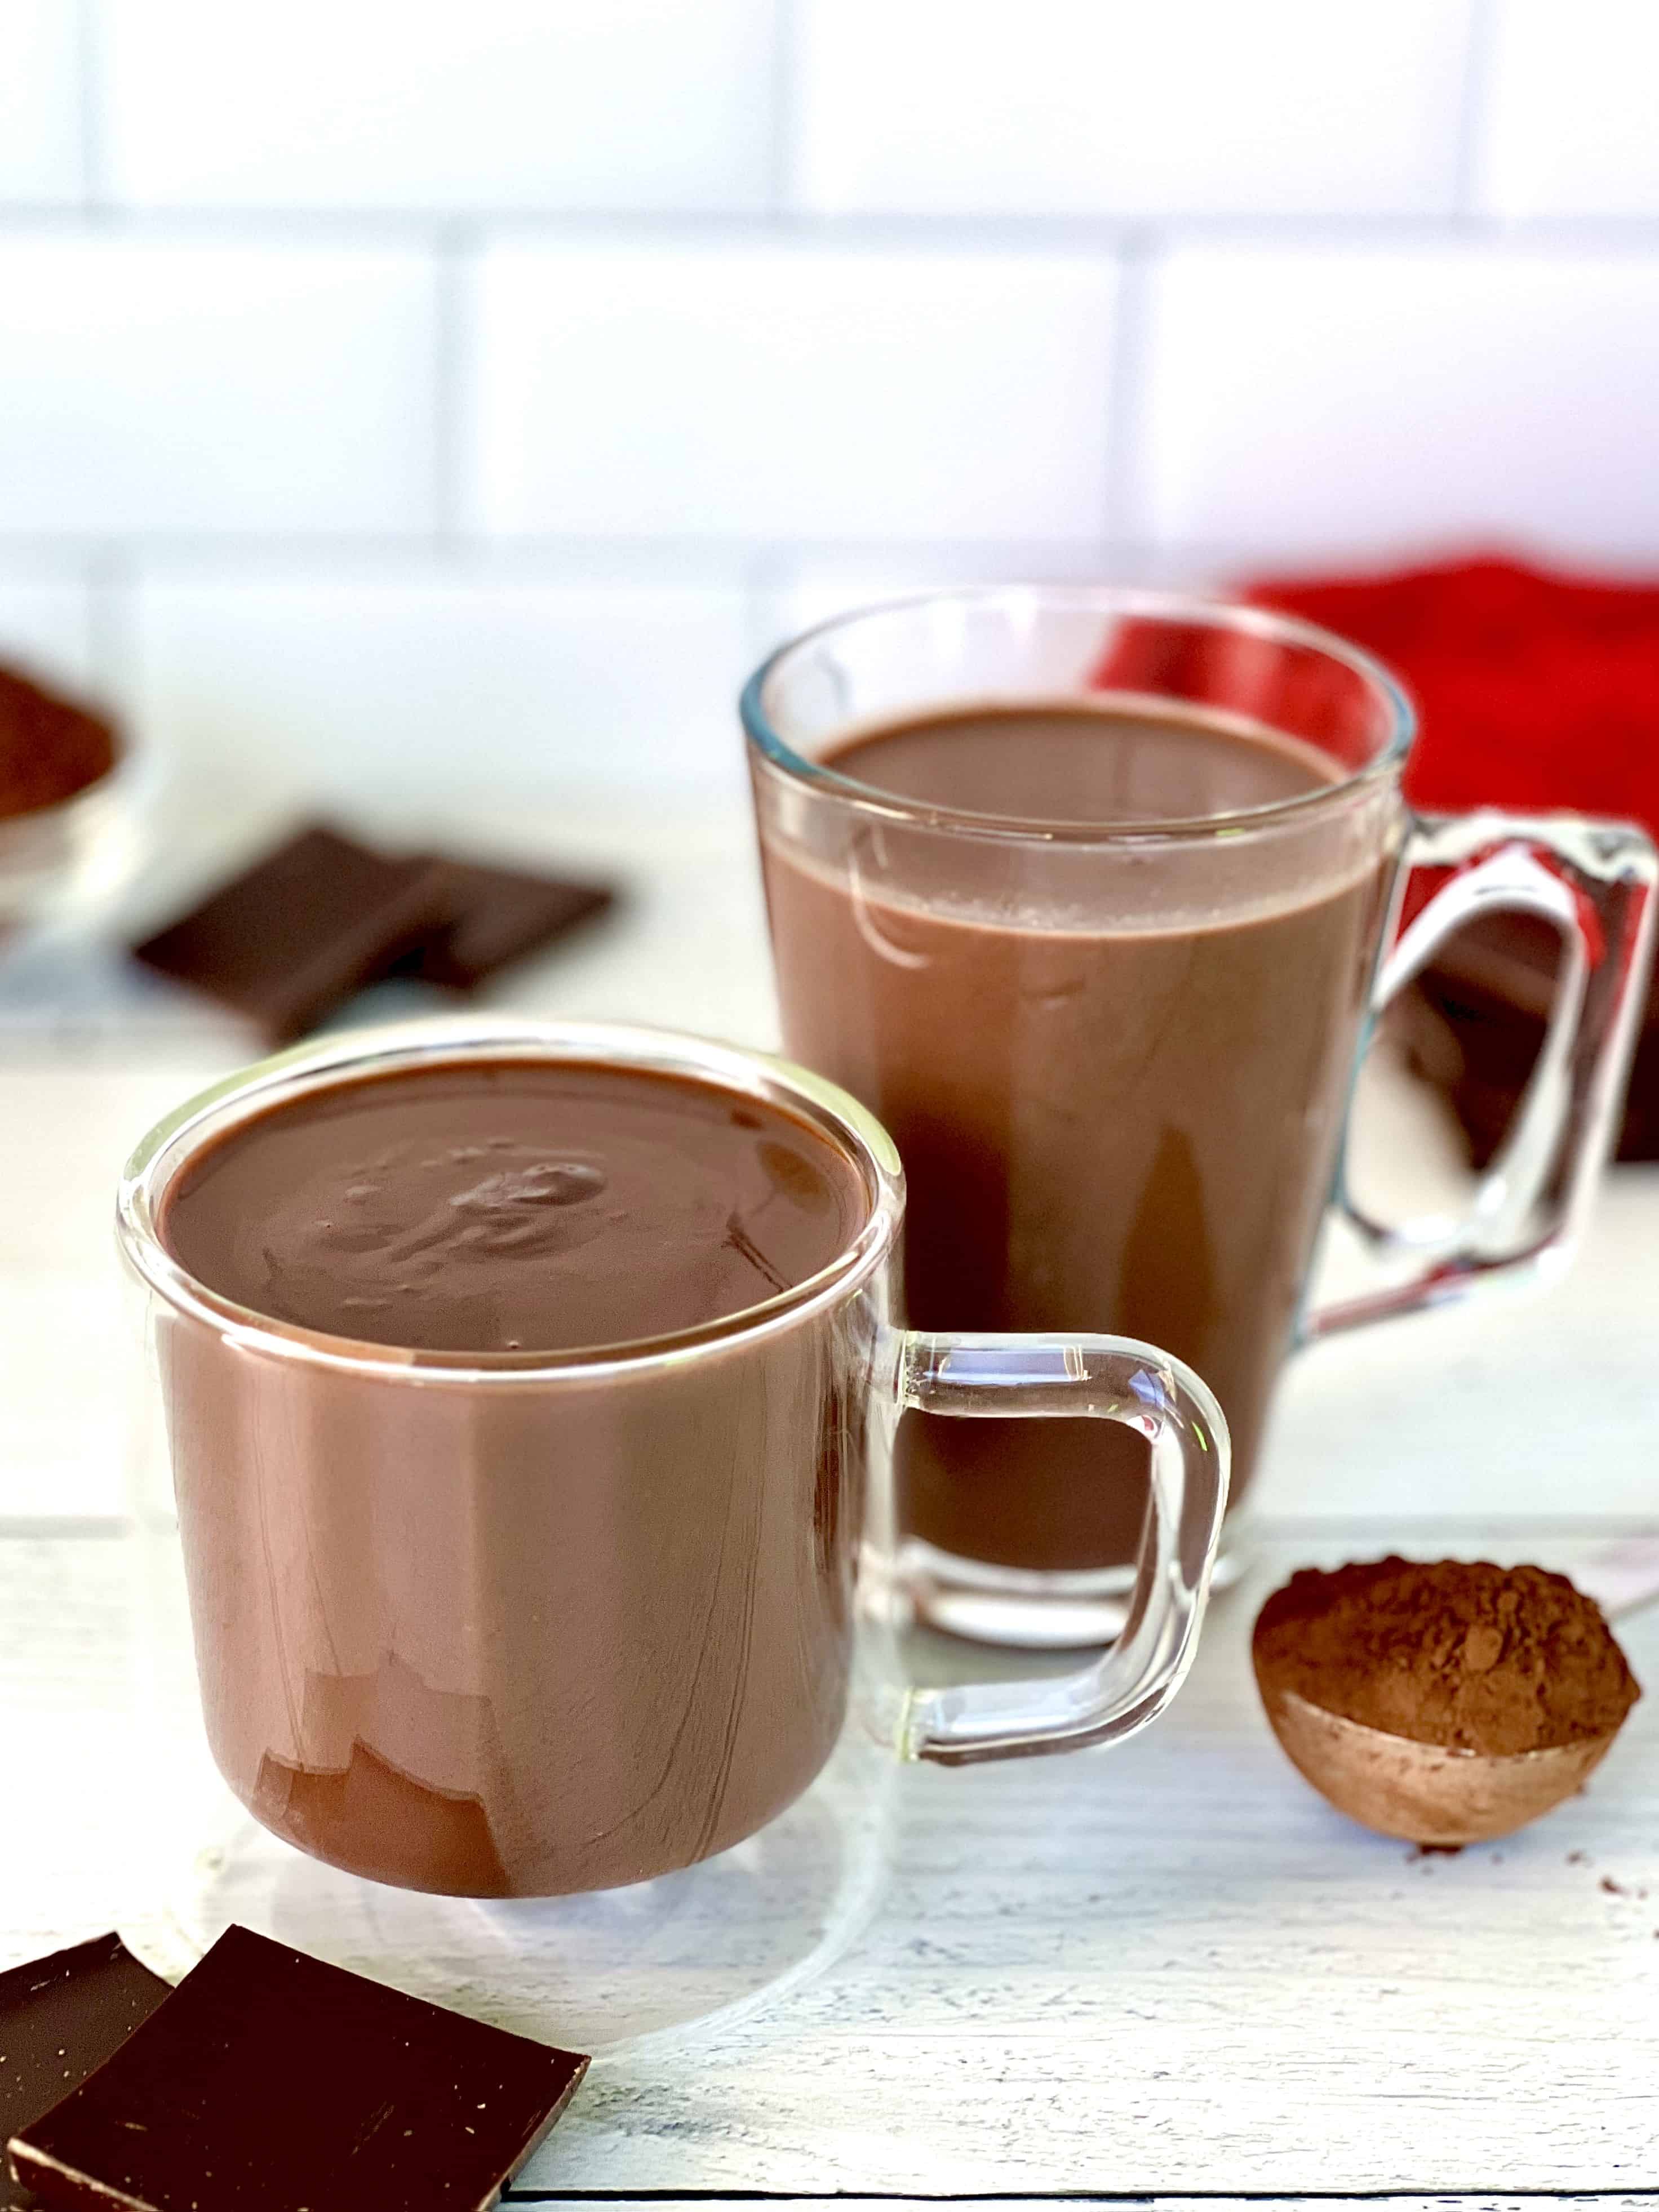 Sipping chocolate in a glass mug next to hot cocoa in a glass mug